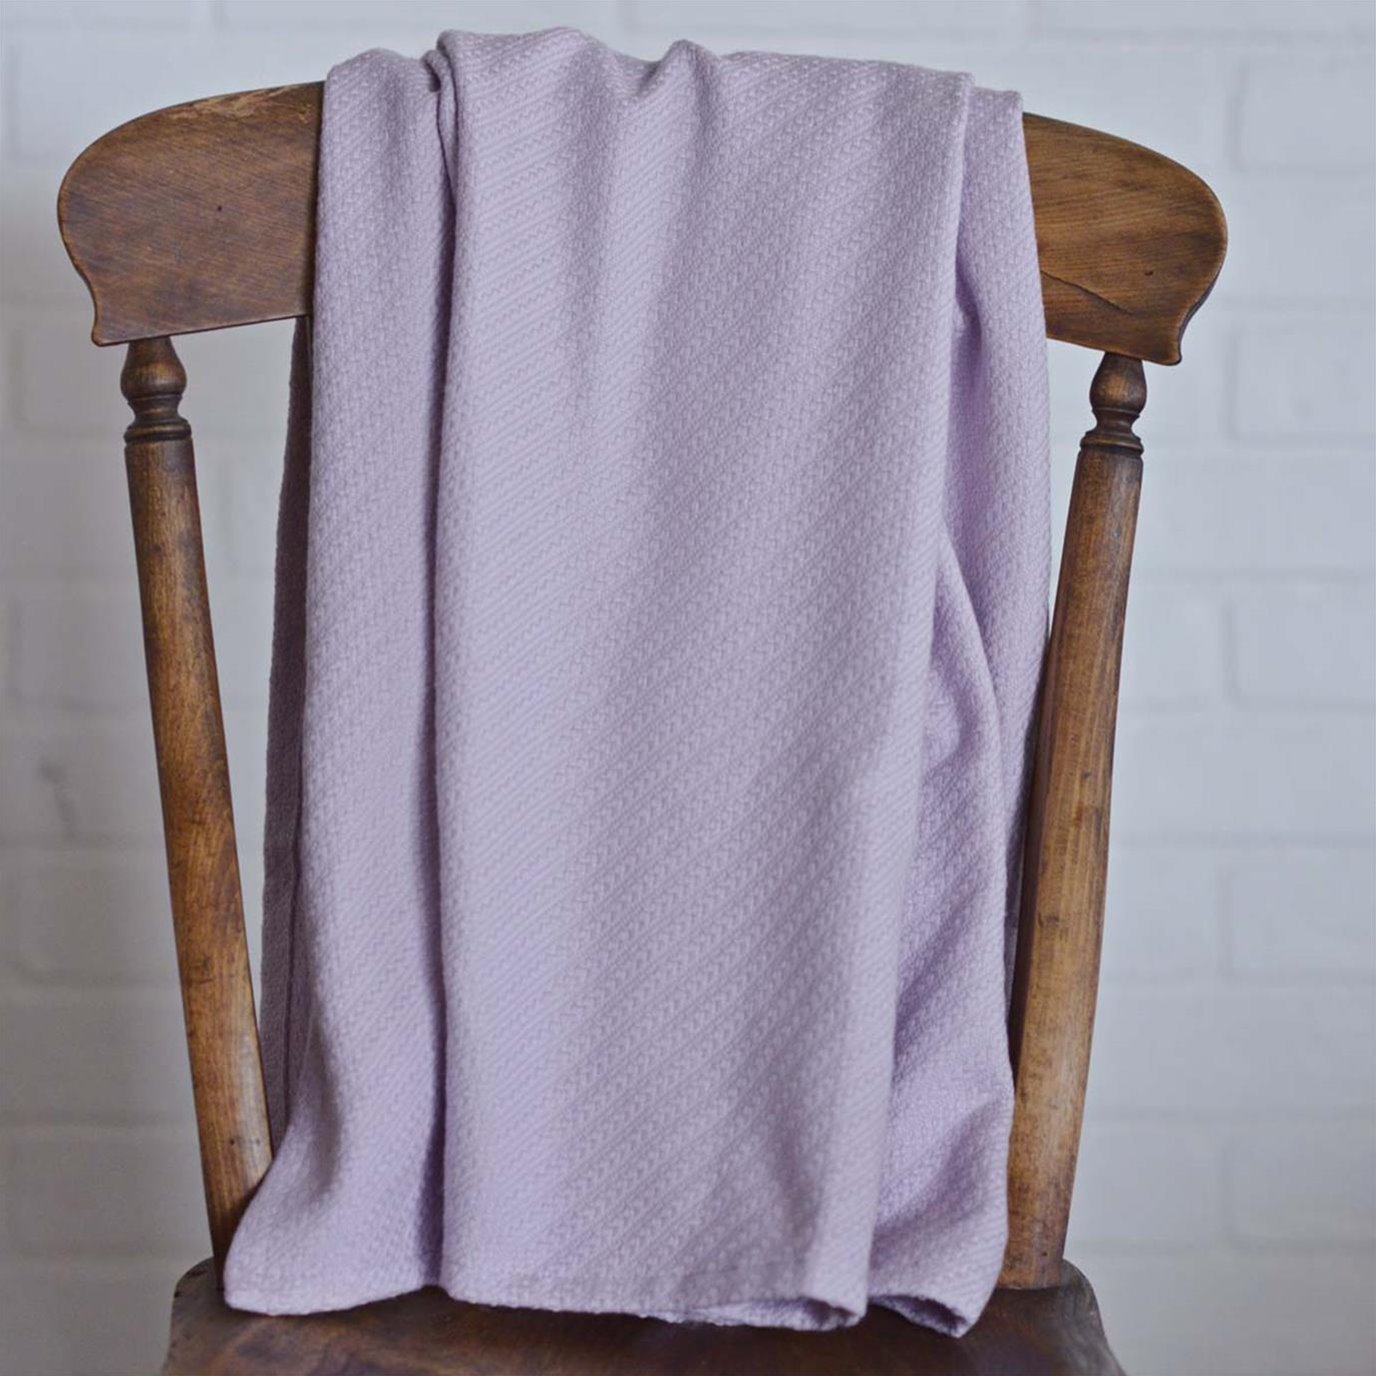 Lilac Baby Blanket 48x36